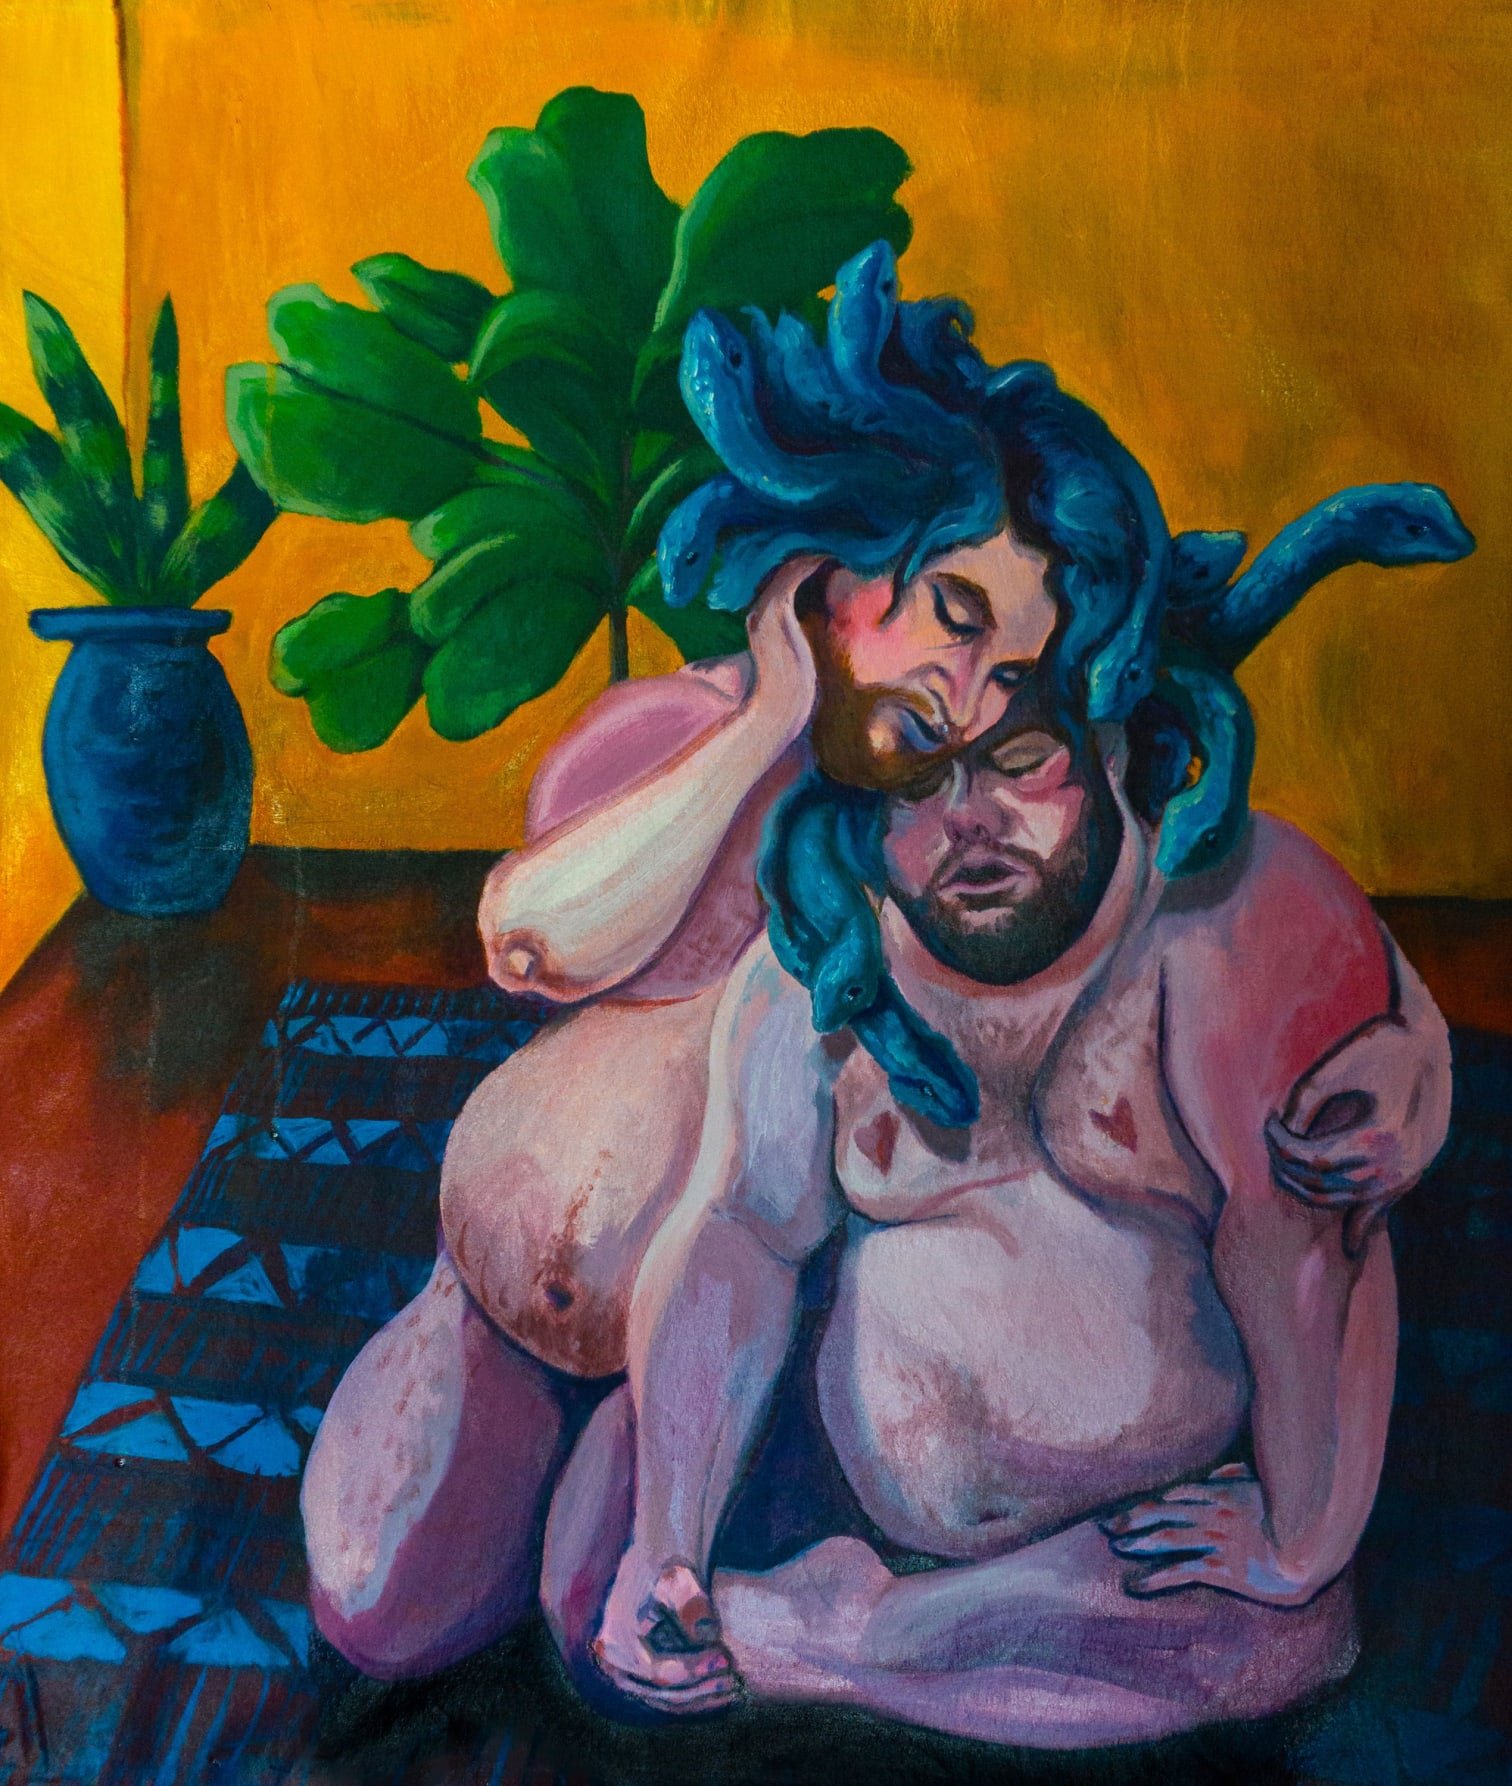 The artist describes this work as a depiction of ‘two, fat, trans, disabled bodies in [an] embrace. The embracing couple are huddled together on a blue rug in a room with warm golden walls and two bright green houseplants. The figure on the right sits with one leg crossed in-front of their belly, one hand propped on a knee and the other grasping a foot. The second figure knees and leans over. Their left arm curls around in a comforting half embrace with a cheek resting on the others forehead. Both have short, brown beards and wild hair which, on closer inspection, is a mess of medusa like blue snakes